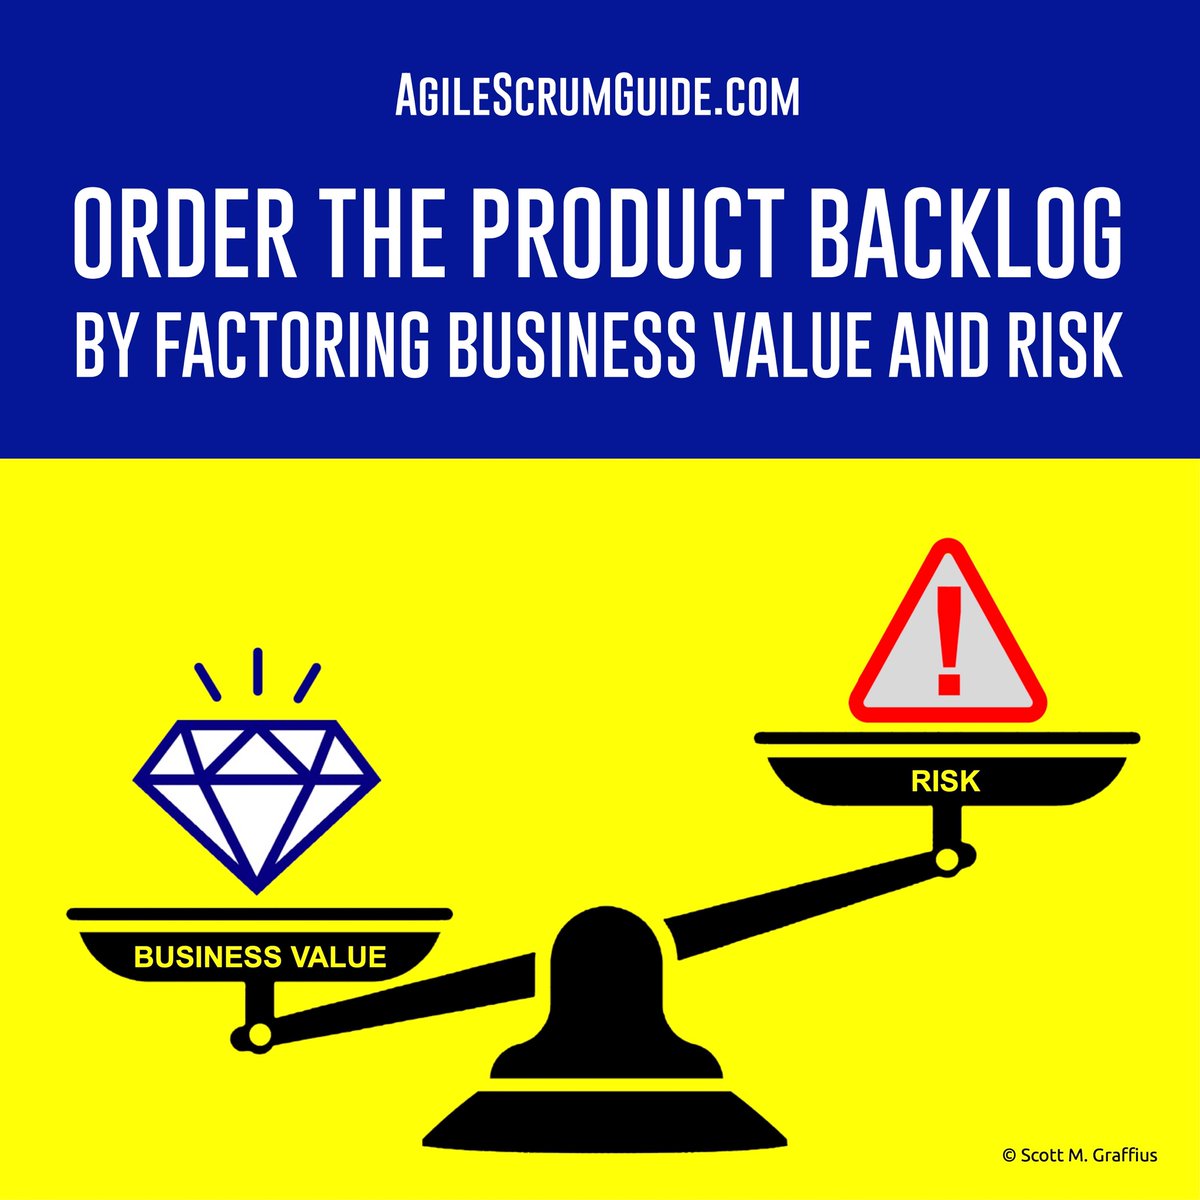 Order the Product Backlog by Factoring Business Value and Risk

🔗 agilescrumguide.com/blog/files/pb-…

#Agile #AgileCoach #AgileProjectManagement #AgileScrum #AgileScrumGuide #Agilist #Agility #Backlog #BusinessValue #ScrumMaster #CSM #ProductOwner #CSPO #Scrum #ProductBacklog #Blog #RSS